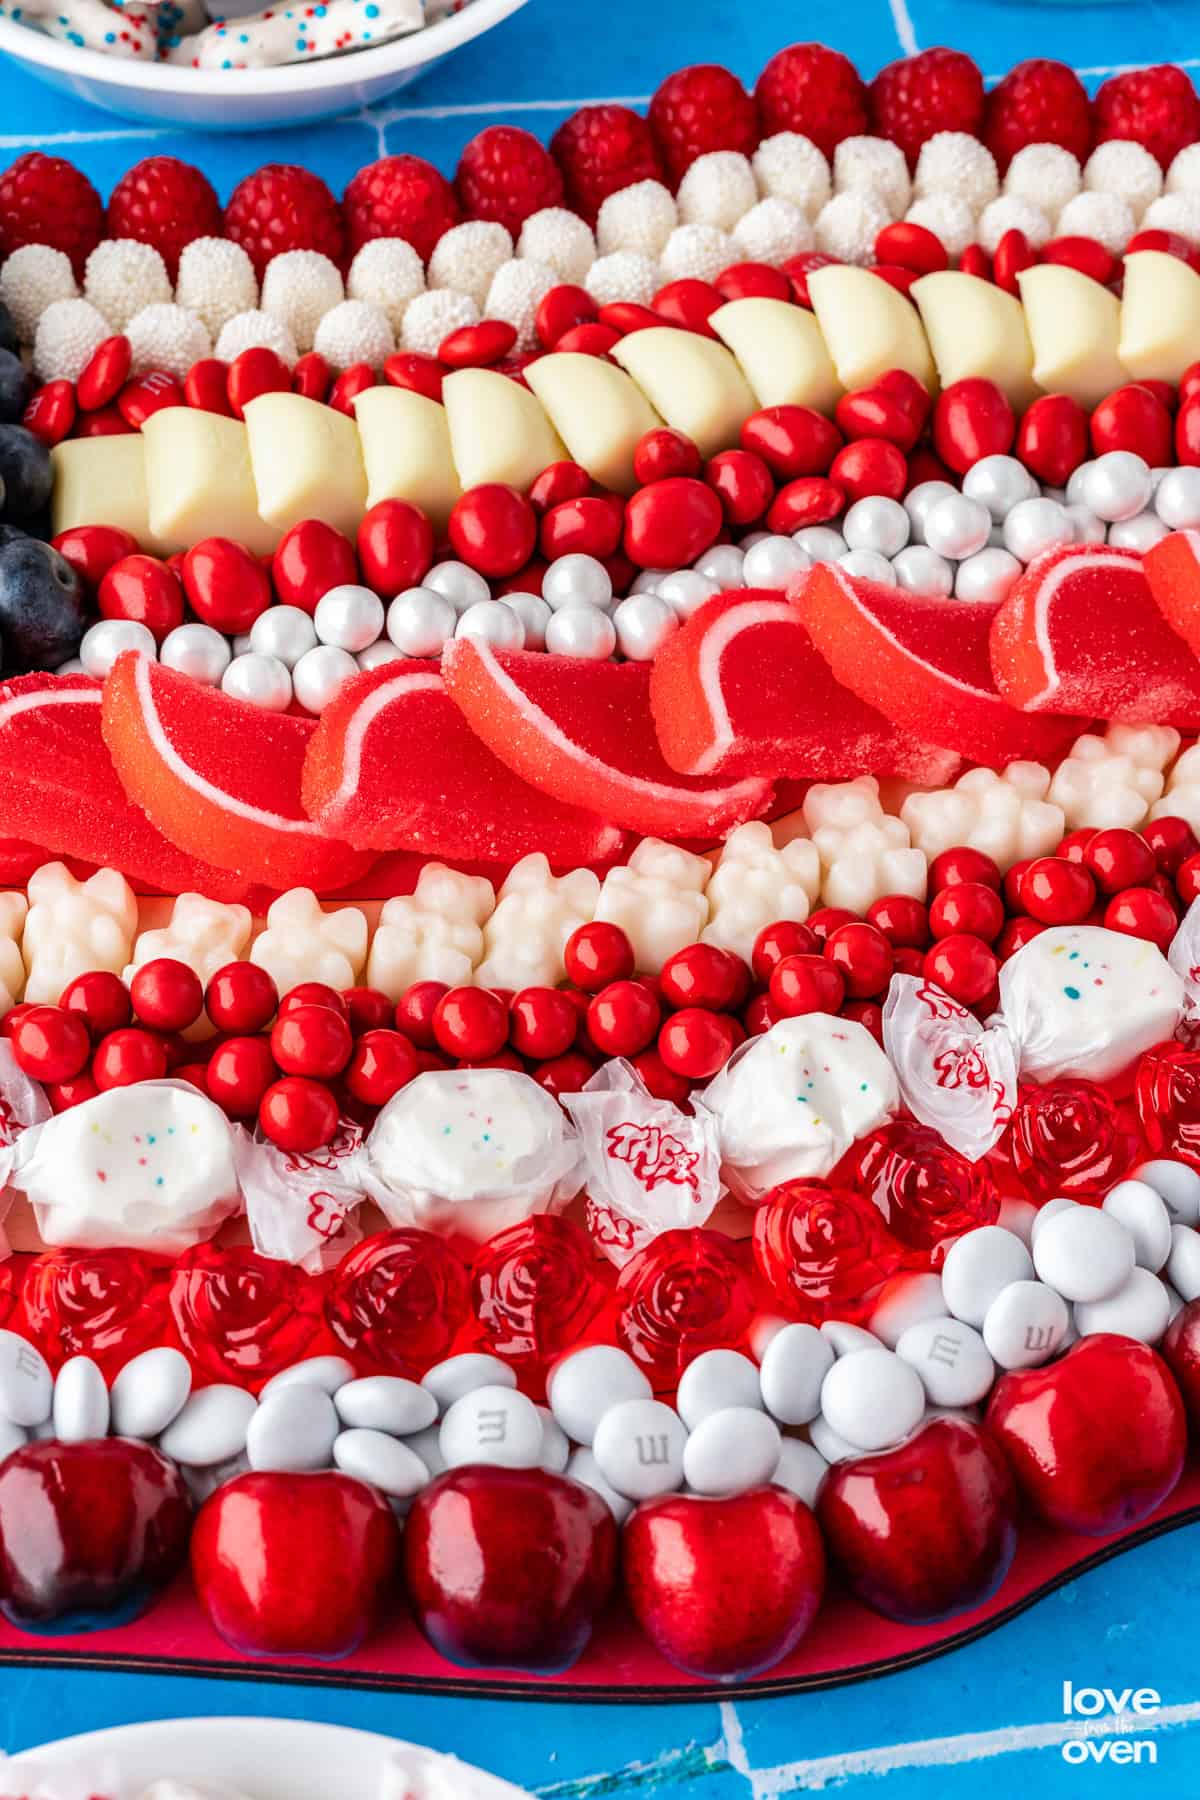 An up close photo of a charcuterie board made with red, white and blue candy to look like a flag